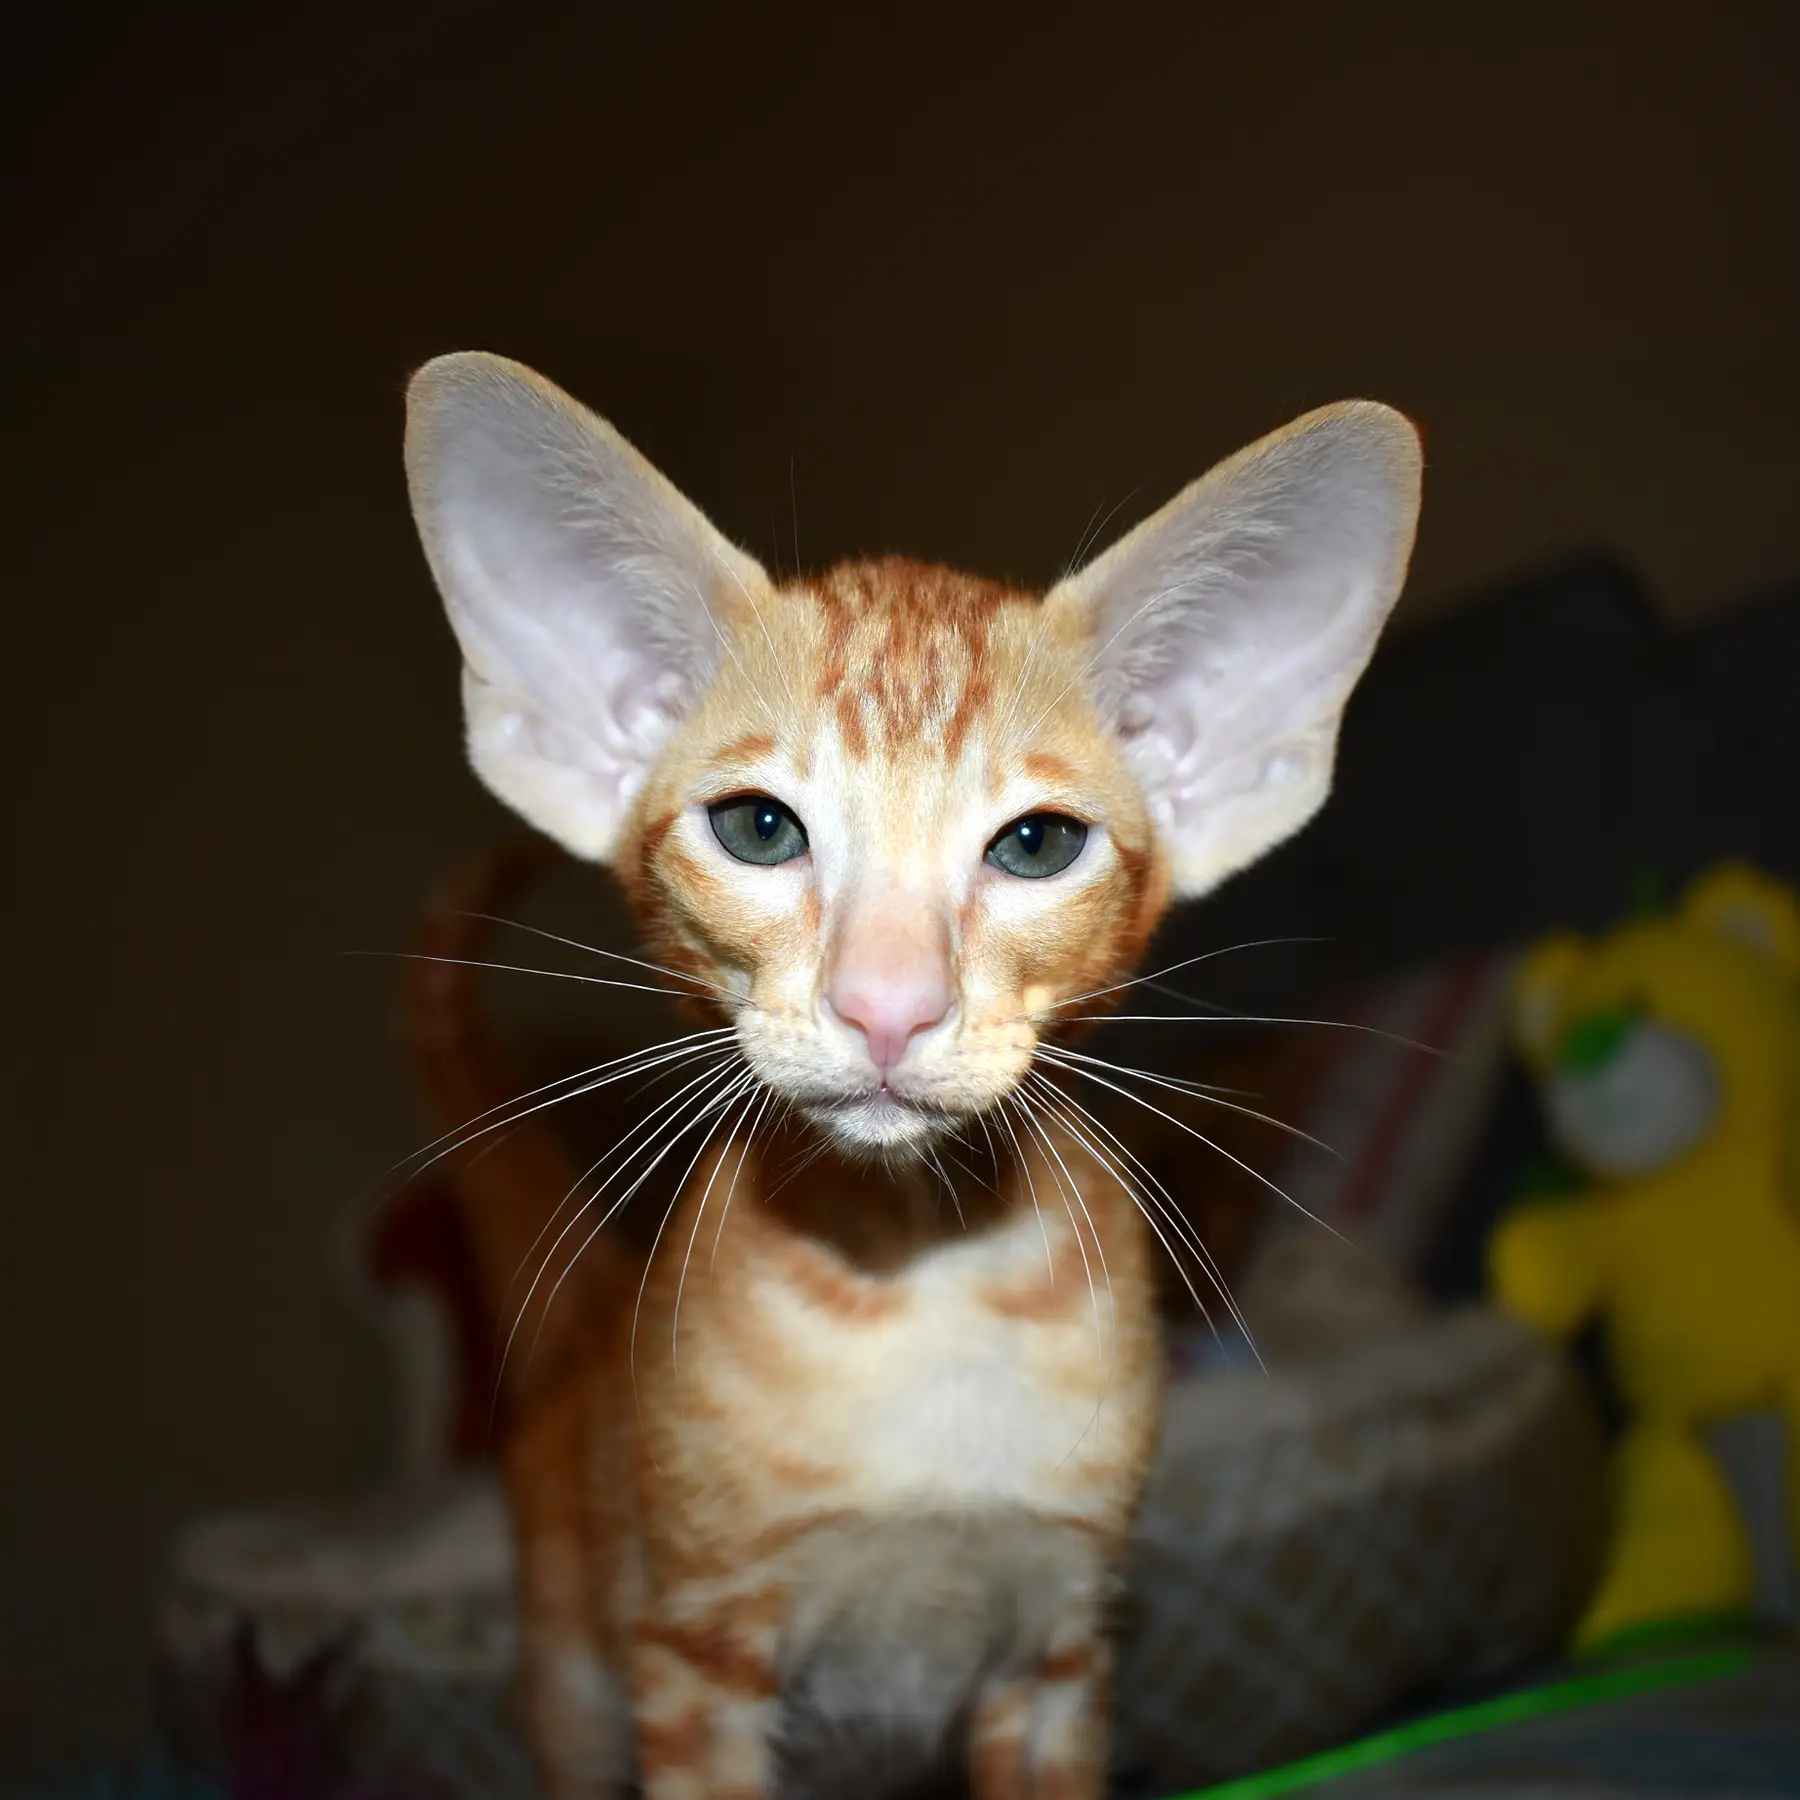 Oriental Shorthair kitten with a triangular head shape and large ears